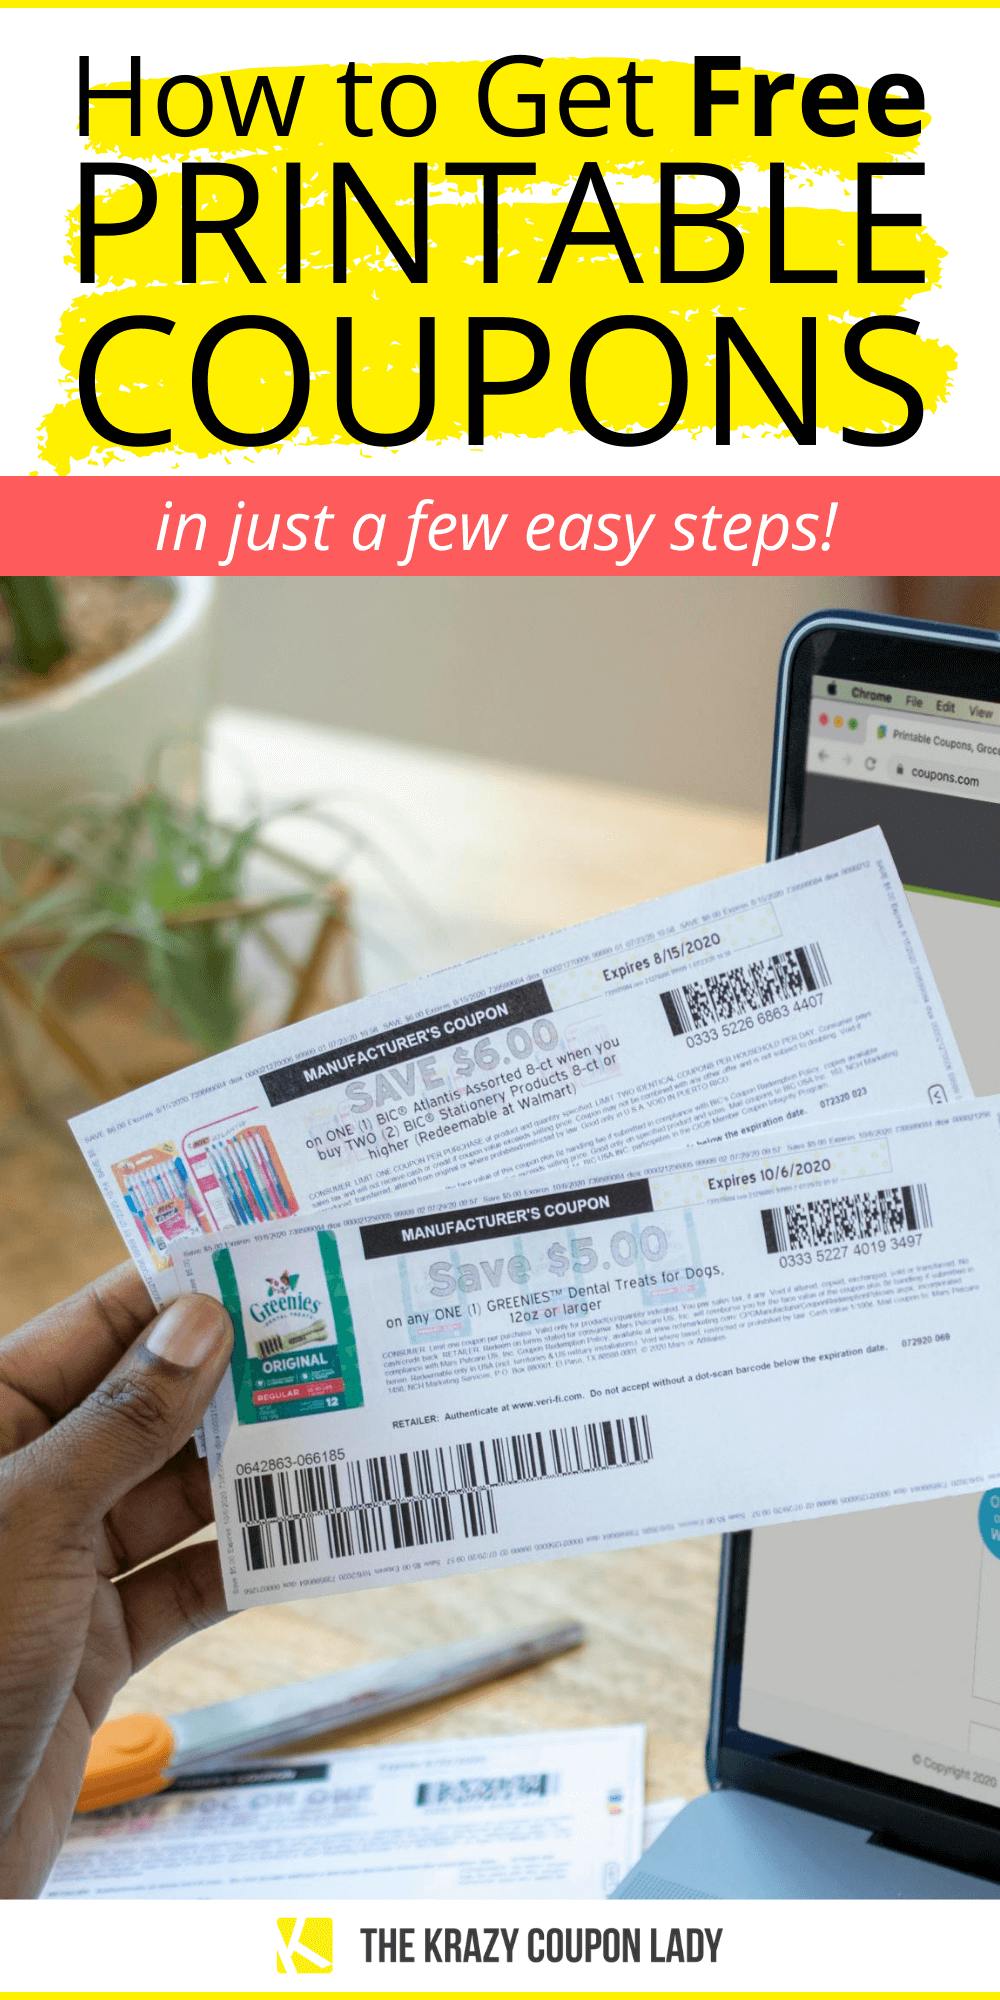 How To Get Free Printable Coupons